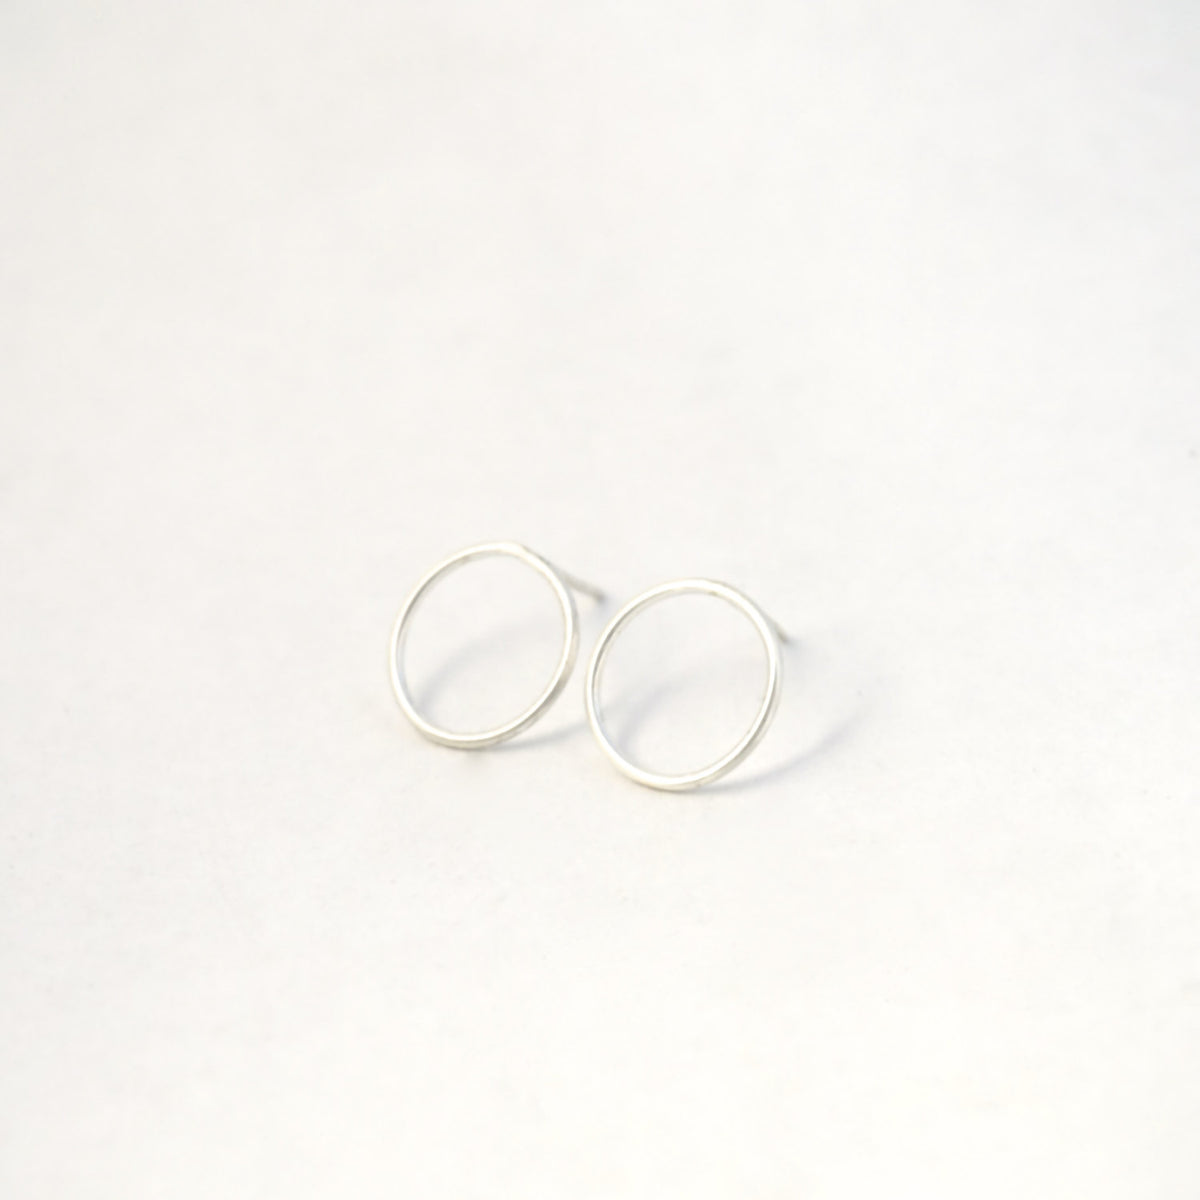 Simple, Elegant and Well Designed Hand-Made Thin Large Circle Studs - 0162 - Virginia Wynne Designs